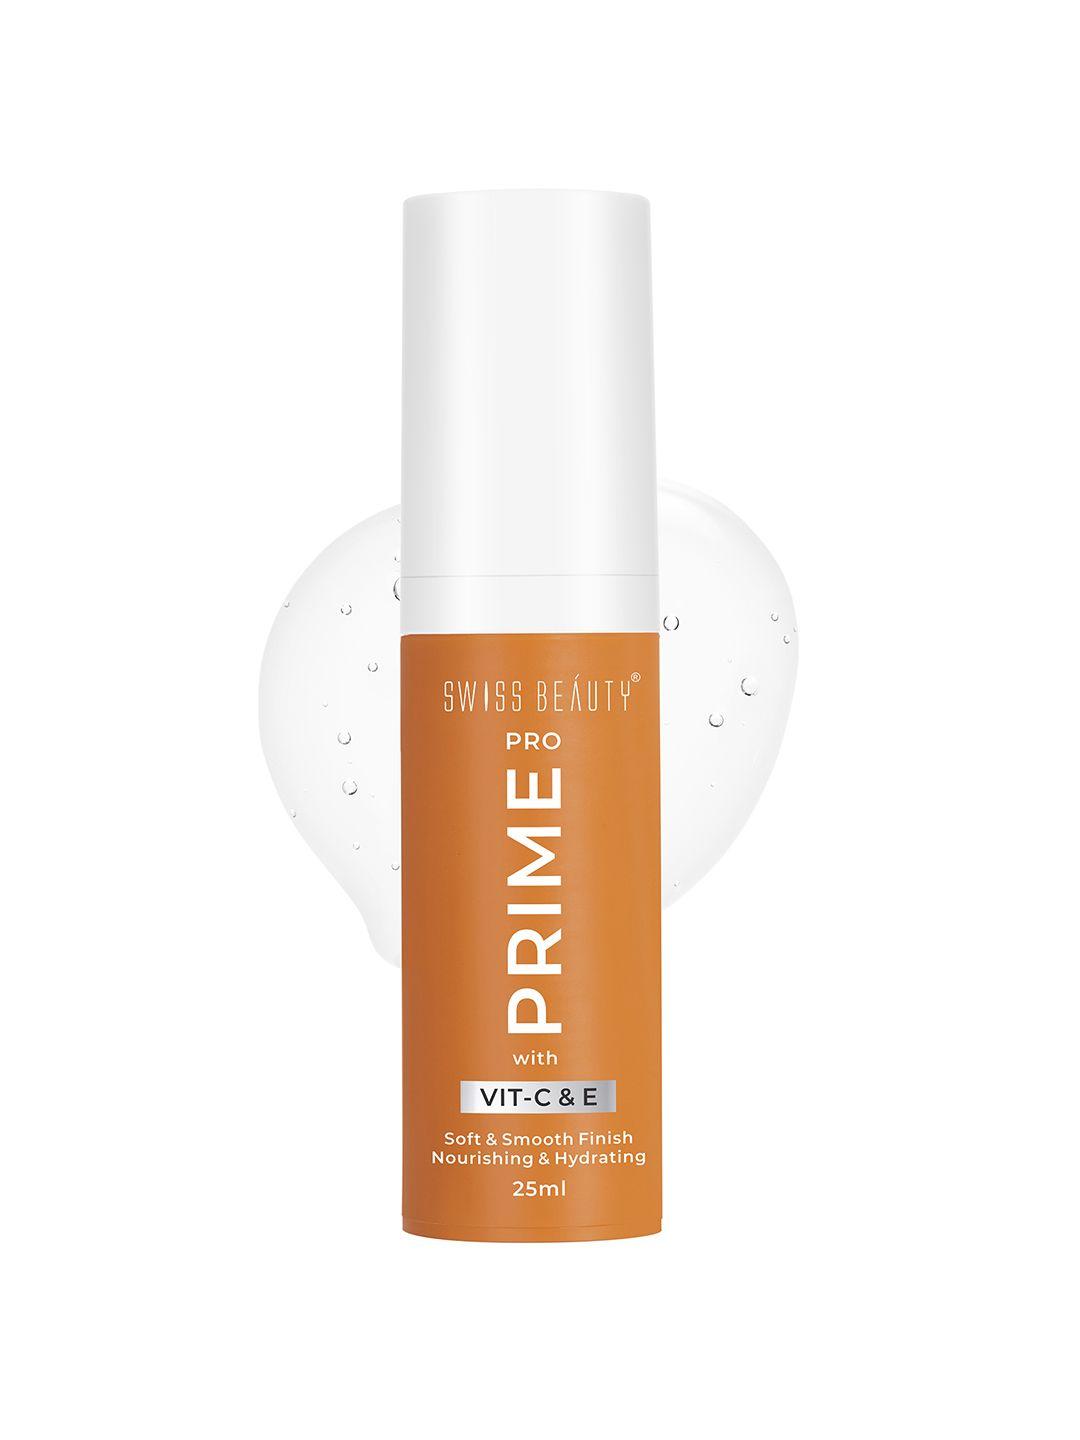 swiss beauty prime pro liquid primer with vitamin c & e for soft & smooth finish - 25 ml